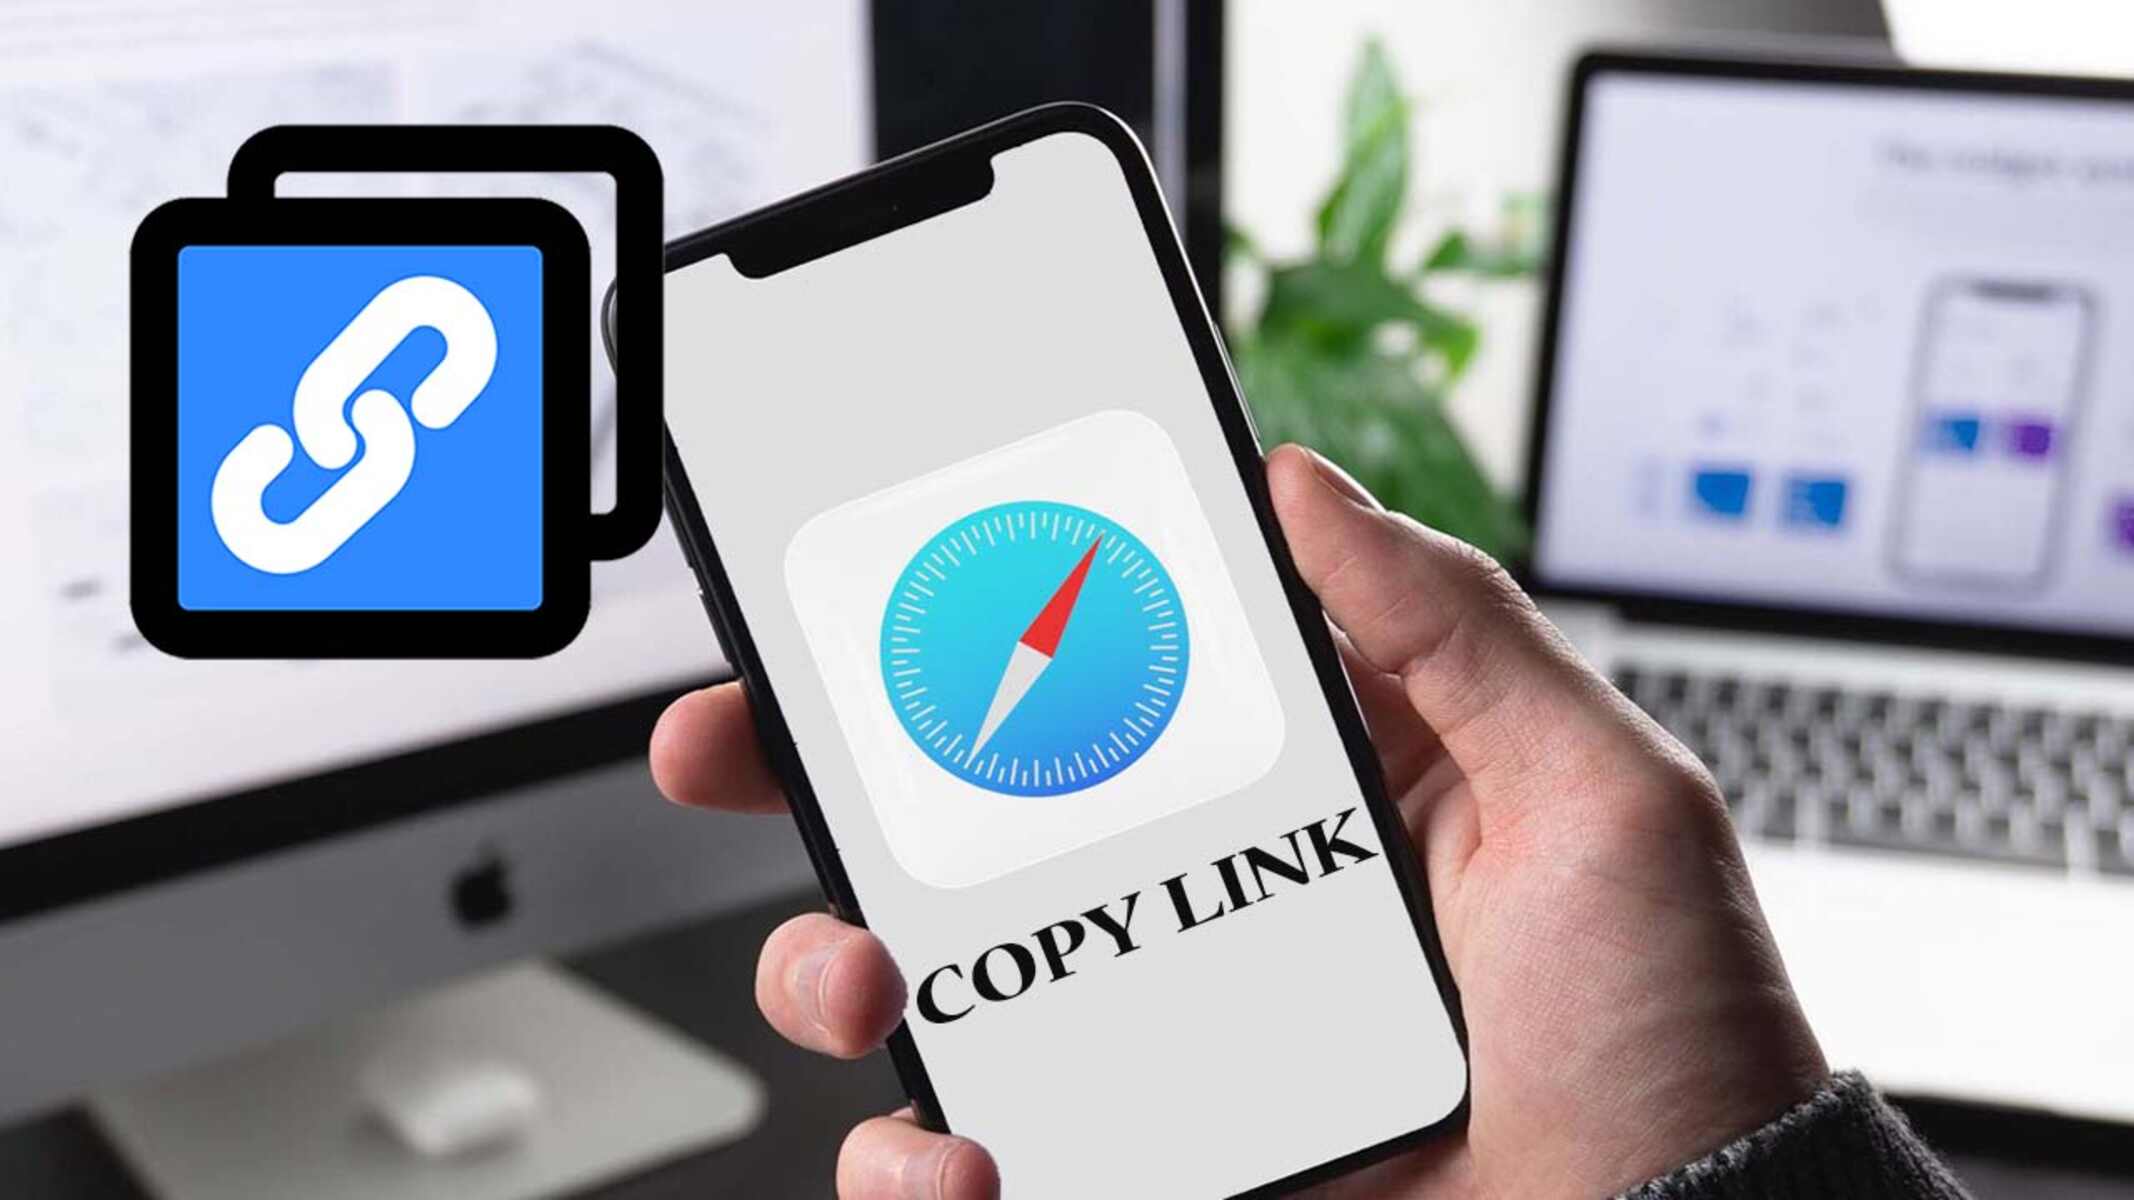 How To Copy Link On Safari